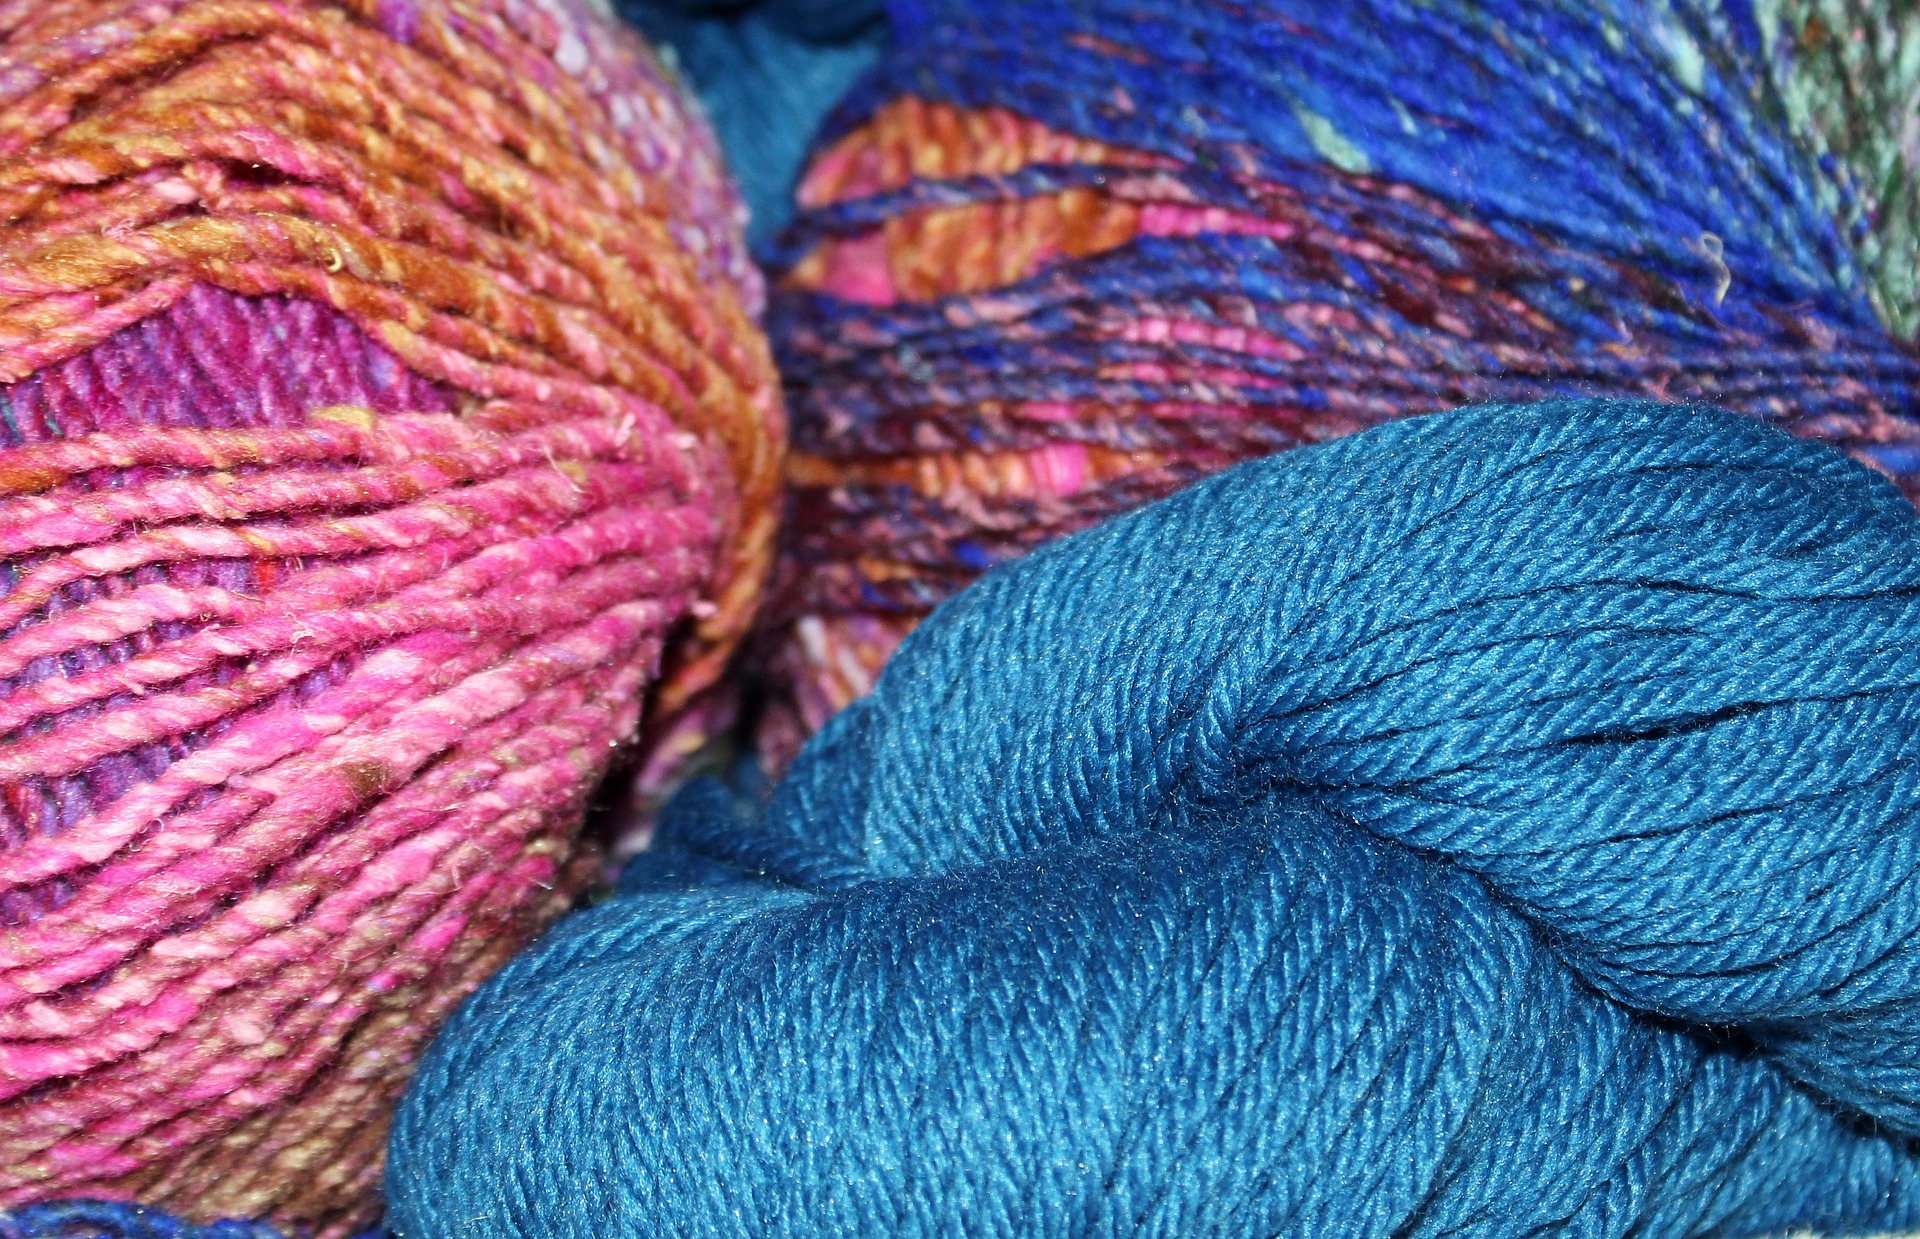 Multi-colored skeins of yarn bunched together.